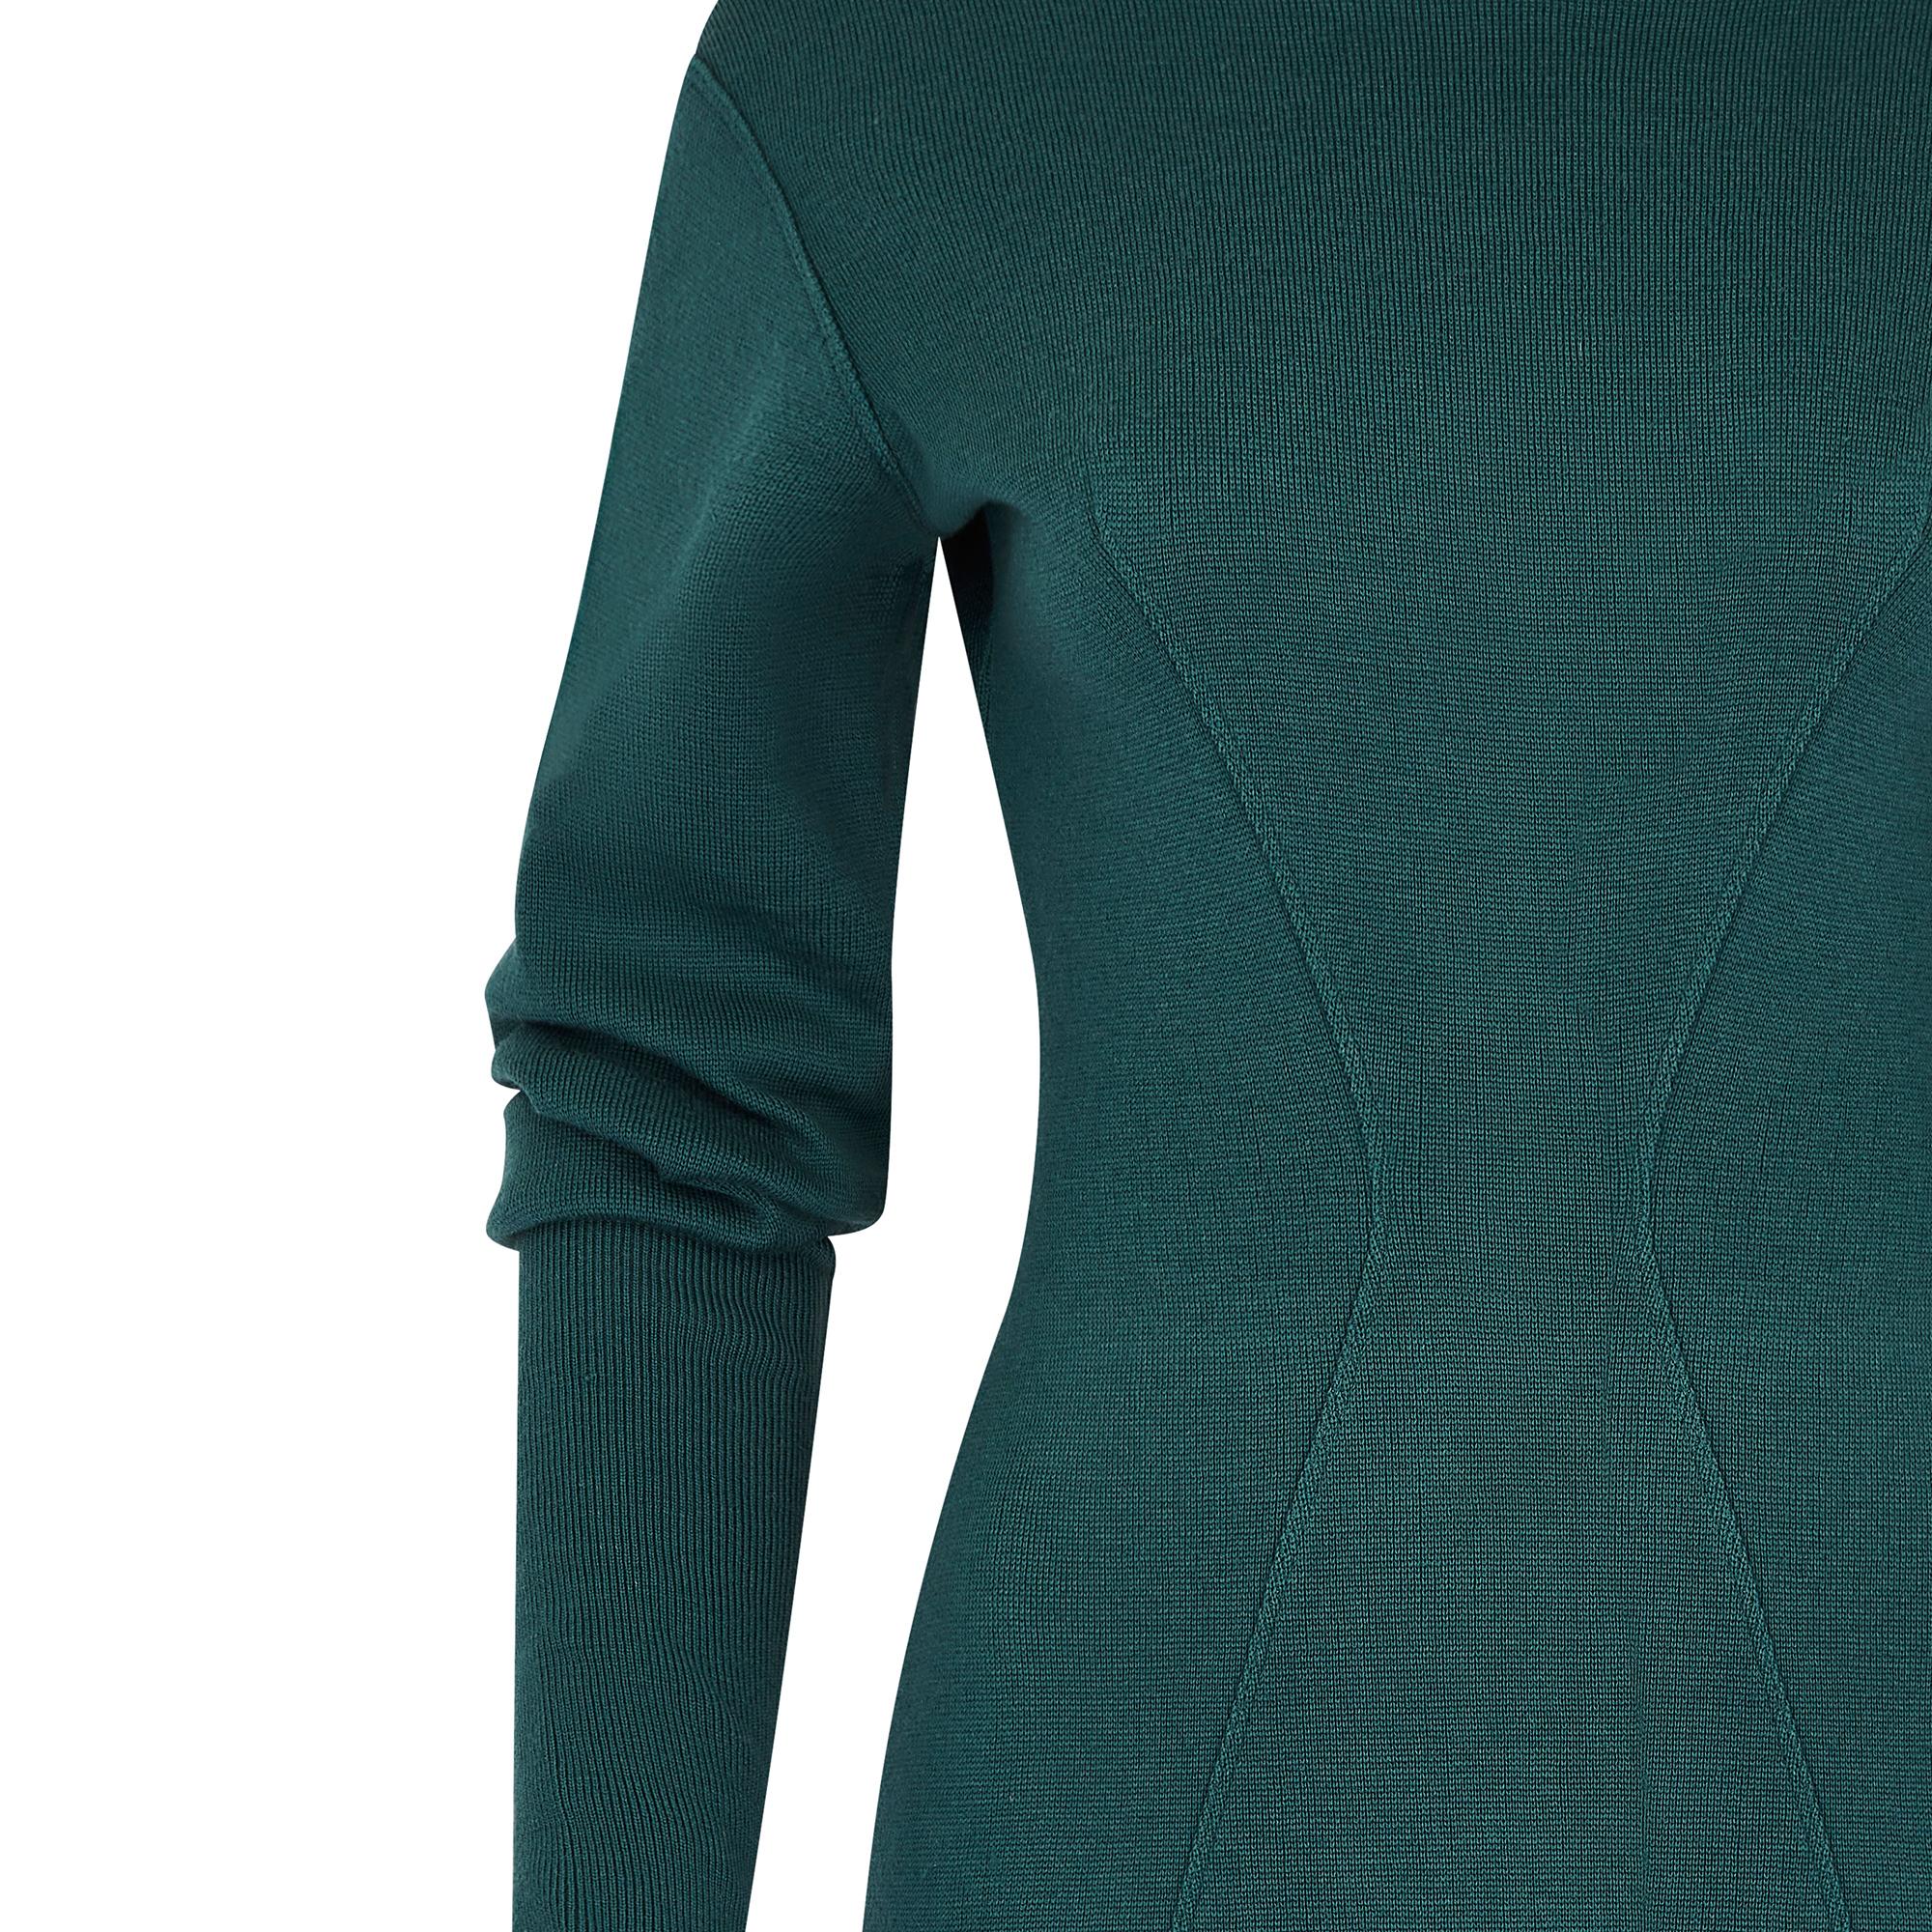 1980s Alaia Wool Teal Green Bodycon Dress For Sale 1